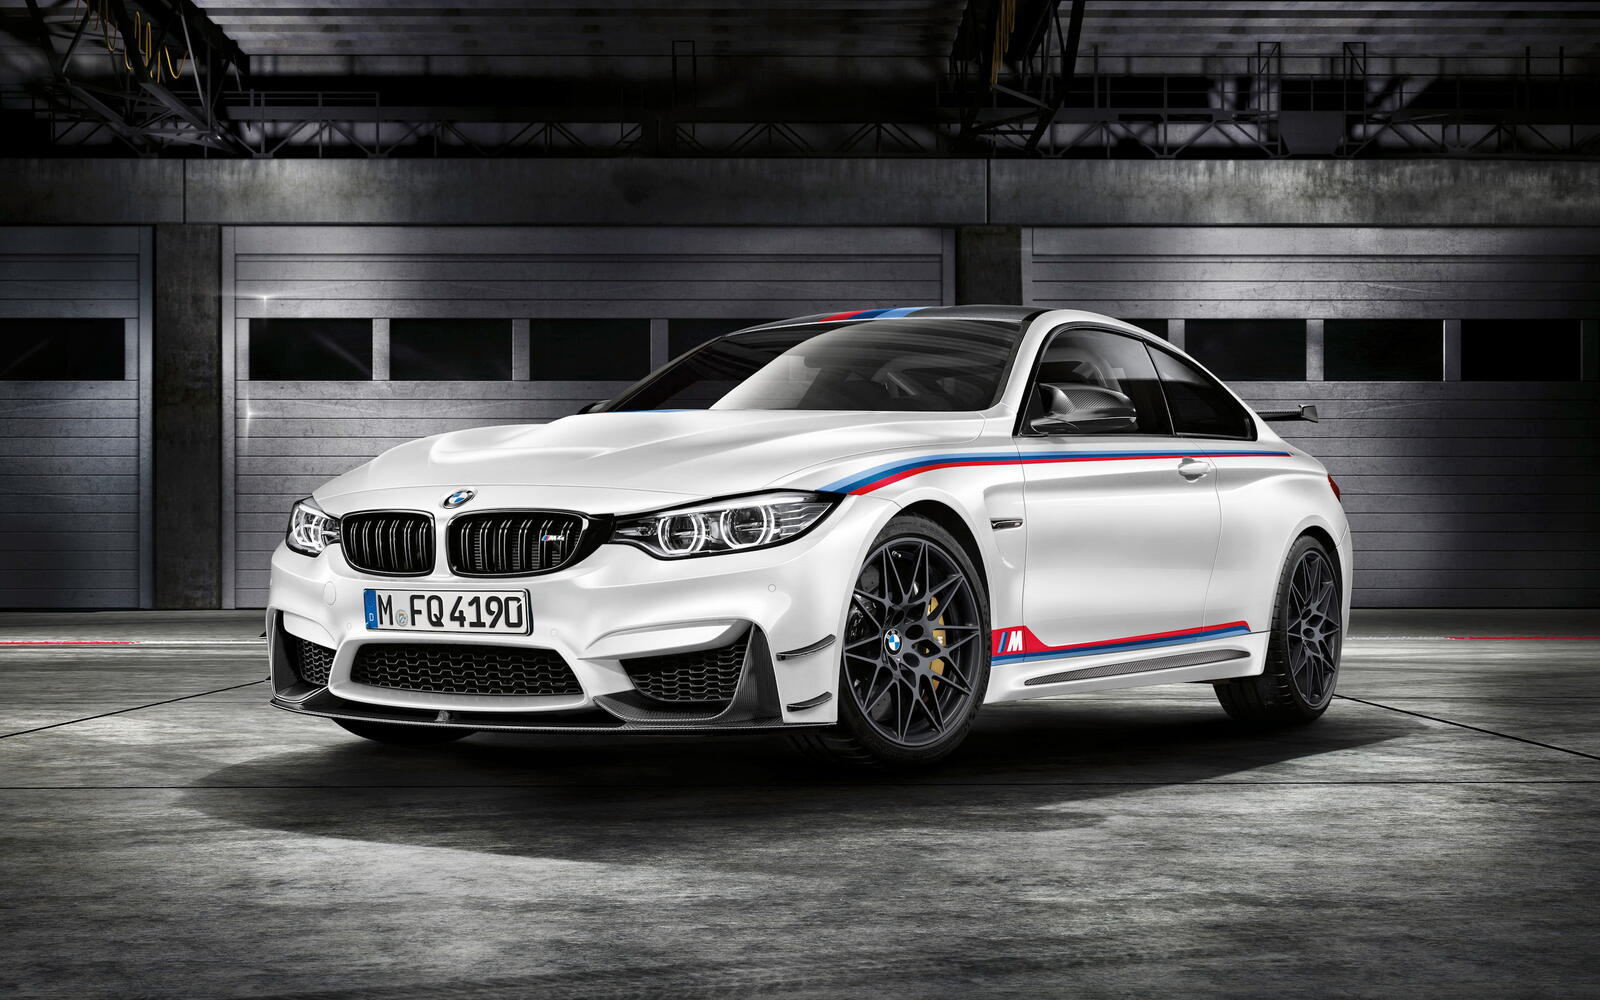 Wallpapers wallpaper bmw m4 white car front view on the desktop